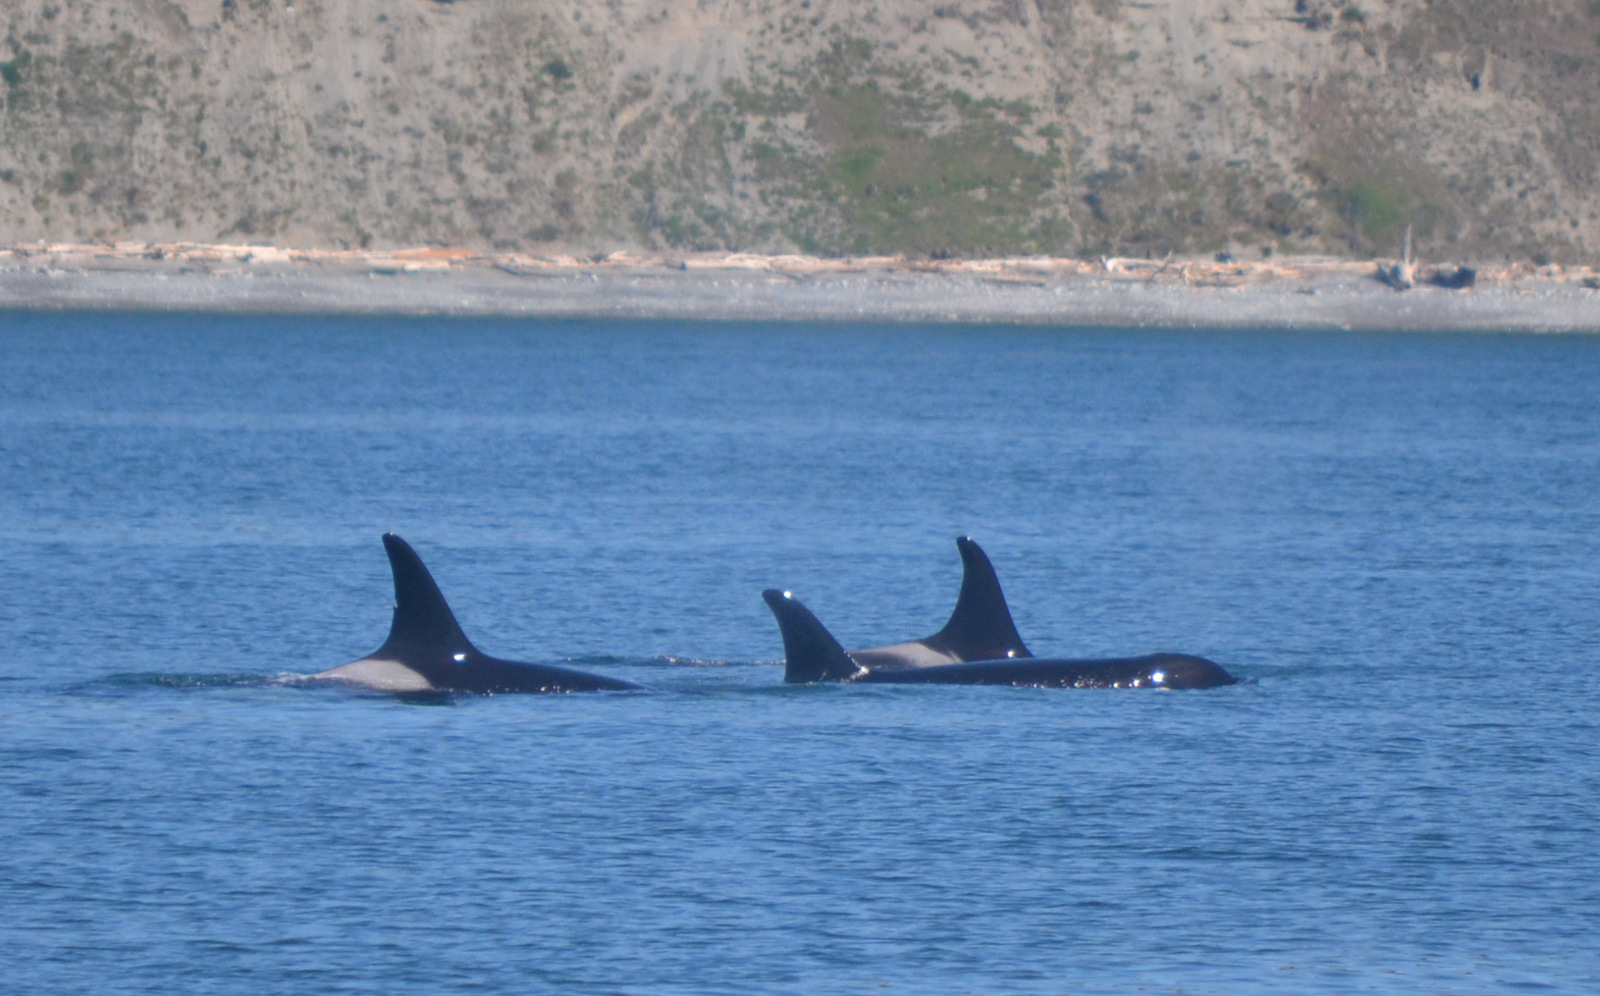 They’re Back! Southern Residents Seen Near San Juan Island